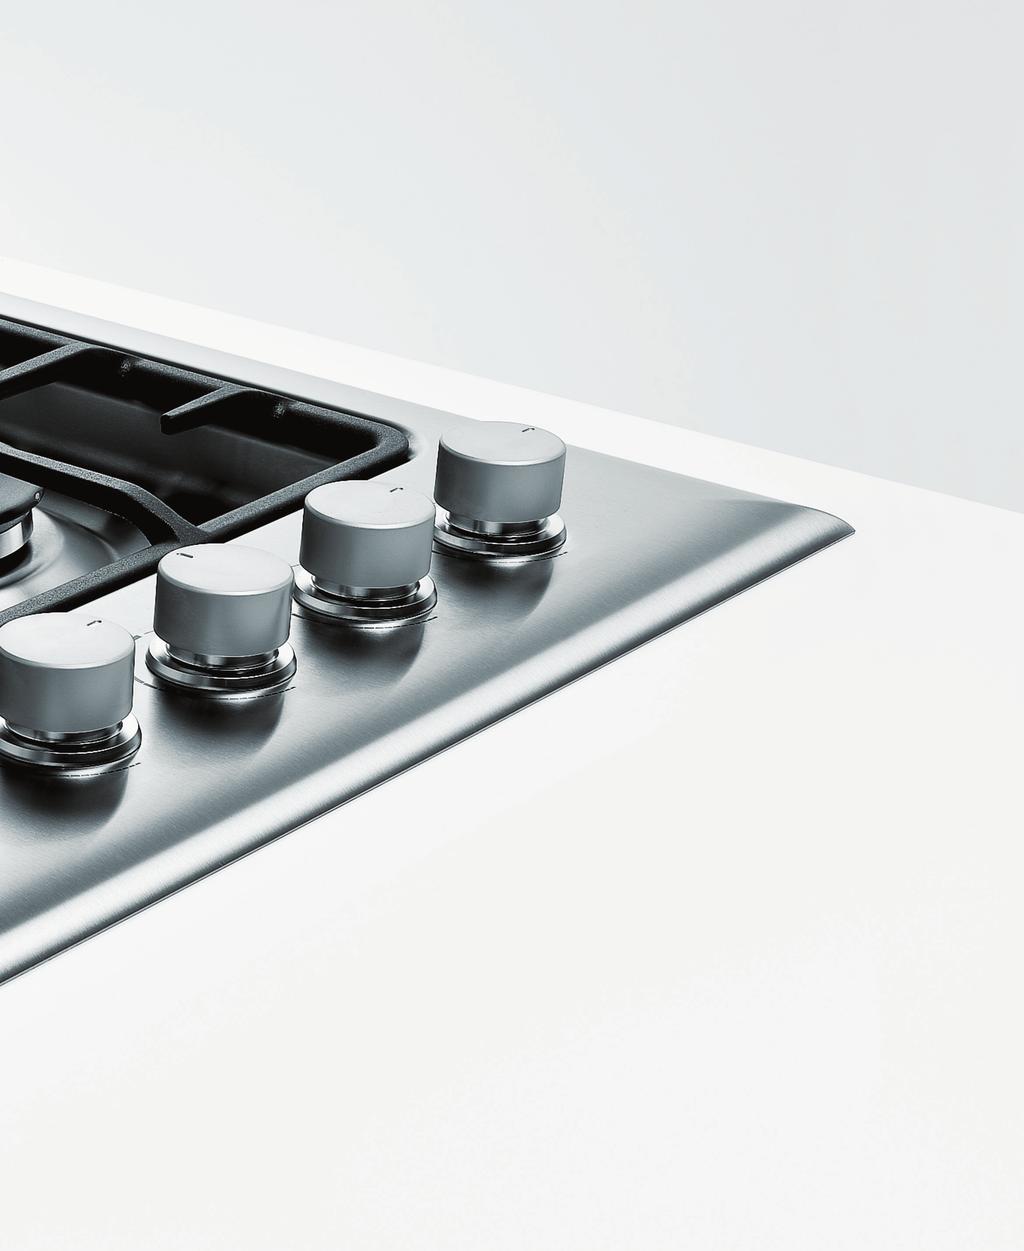 GAS cooktop key features For chefs who prefer the conventional method of cooking, Fisher & Paykel have a range of smart features that make cooking with gas easier, quicker and more convenient than